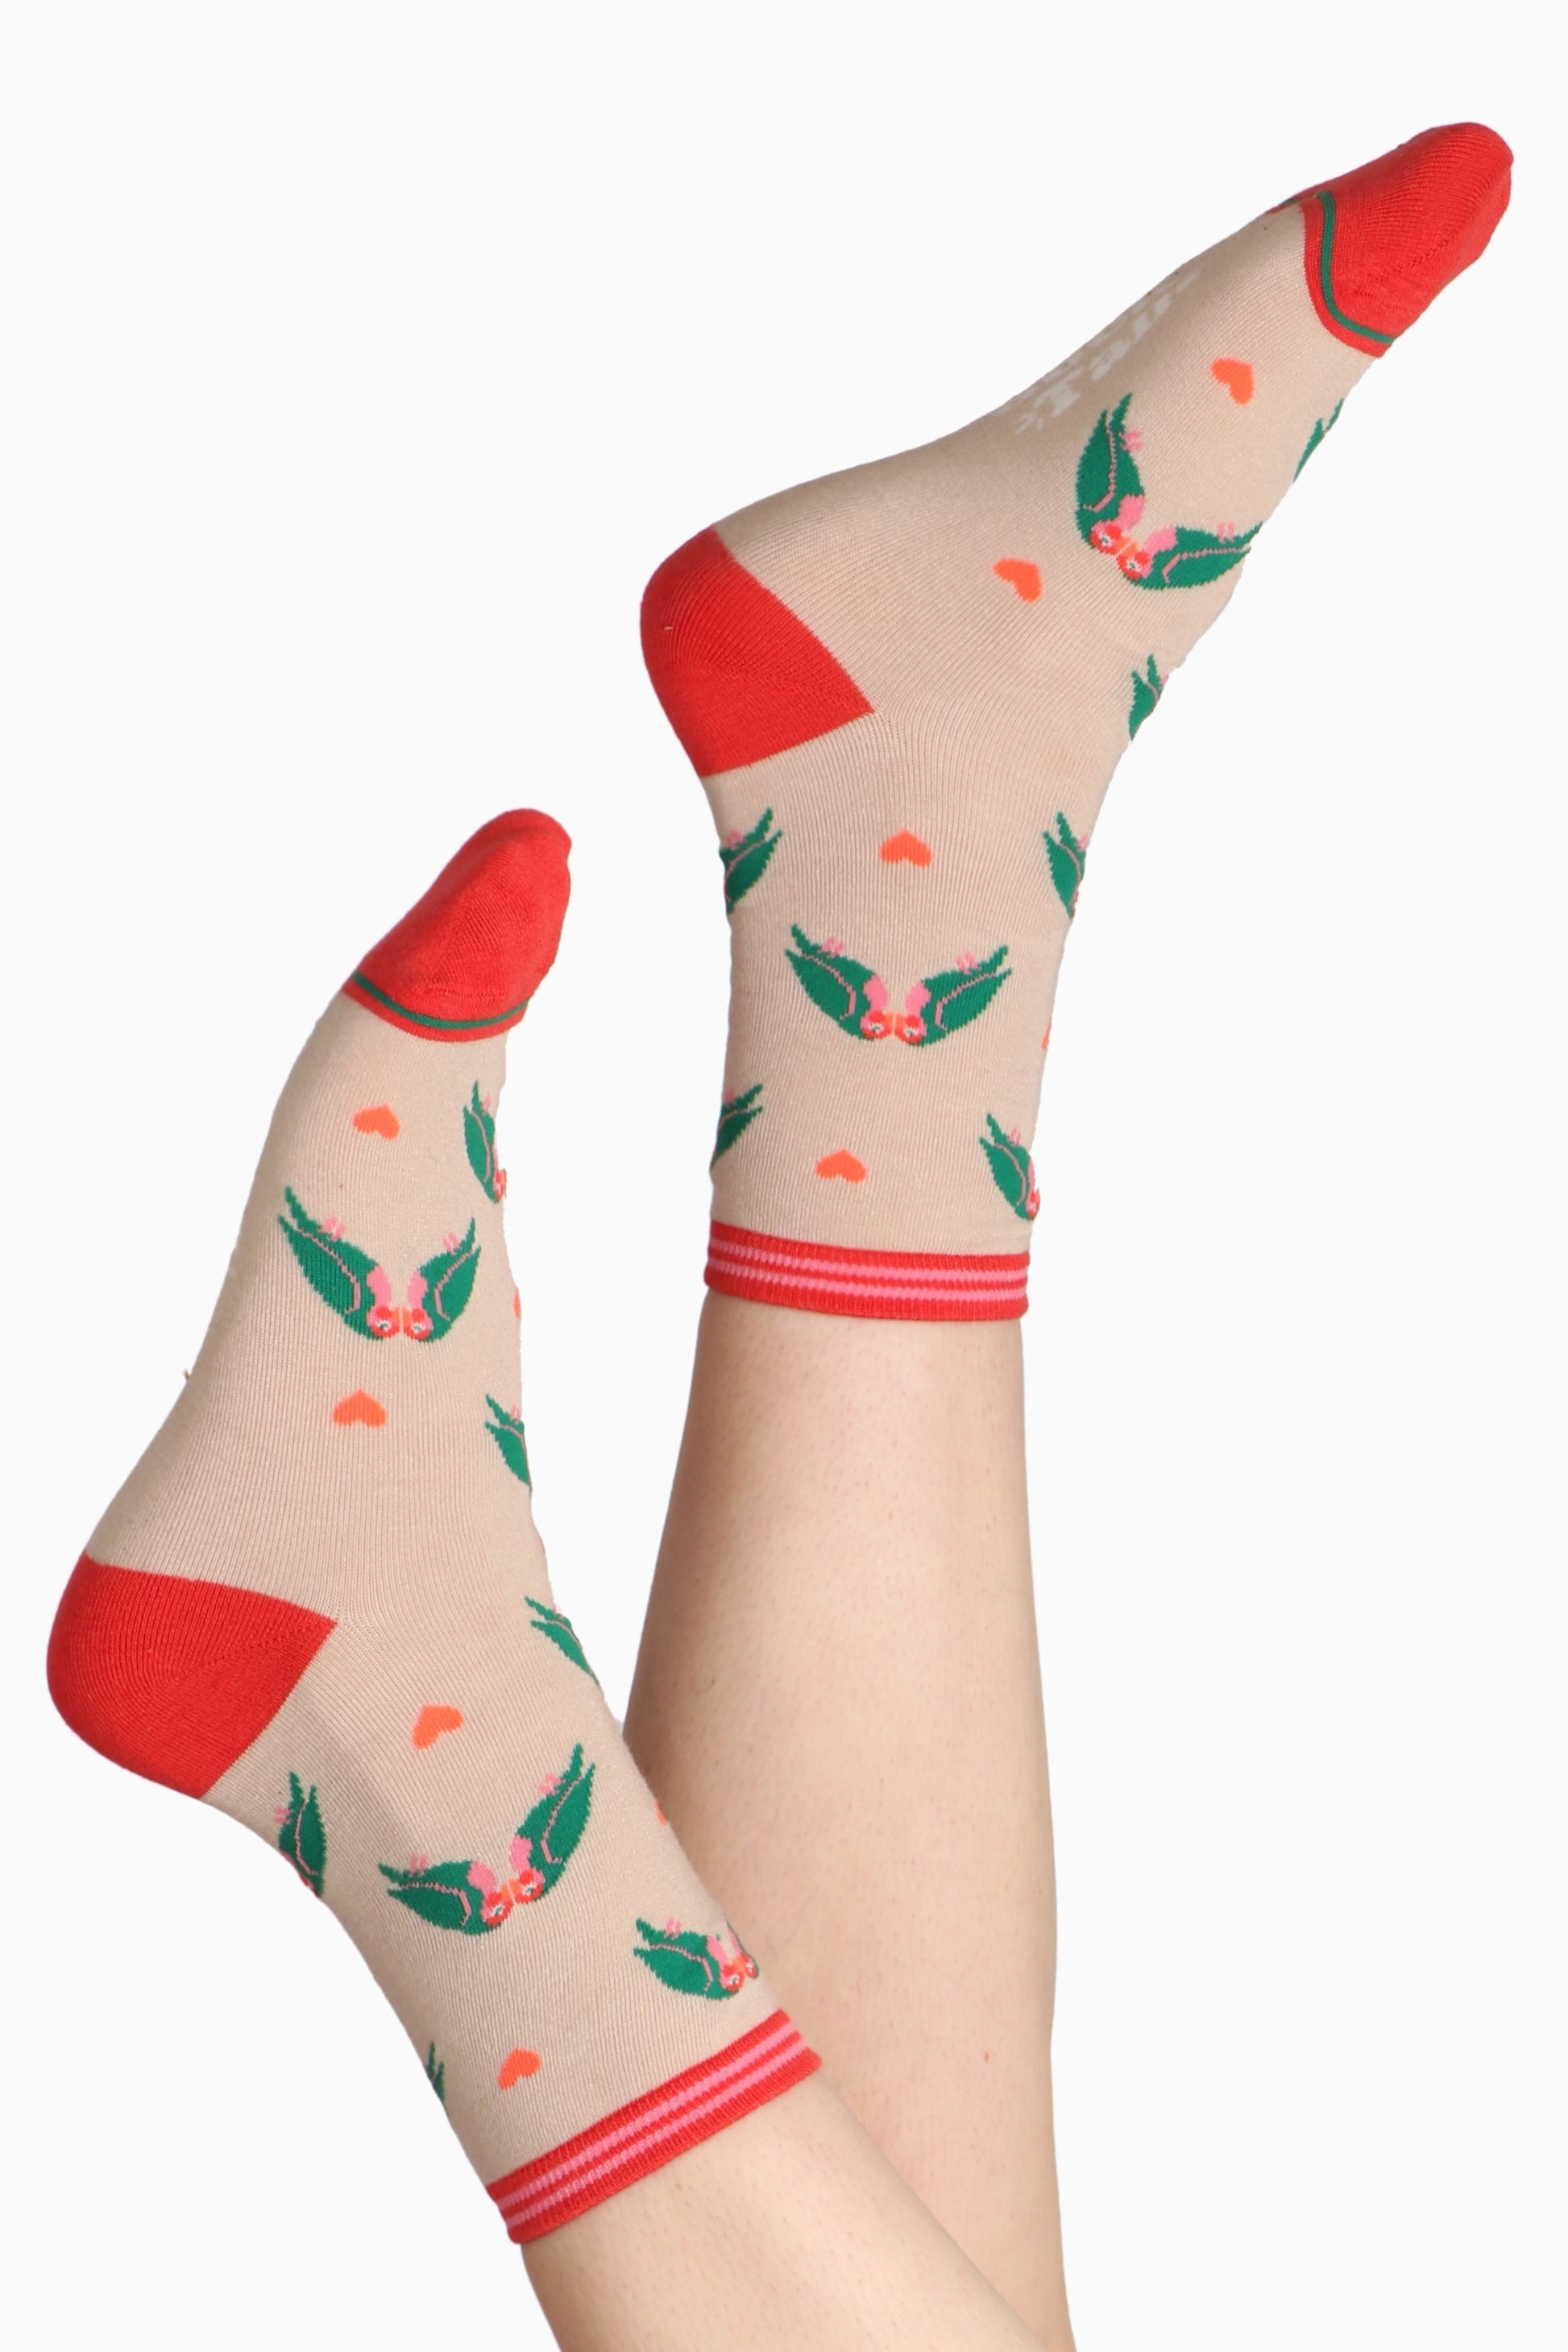 Ladies feet in air wearing bamboo socks. Sock are printed with lovebirds on a cream base with a coral pinkey tone contrasting toe and heel